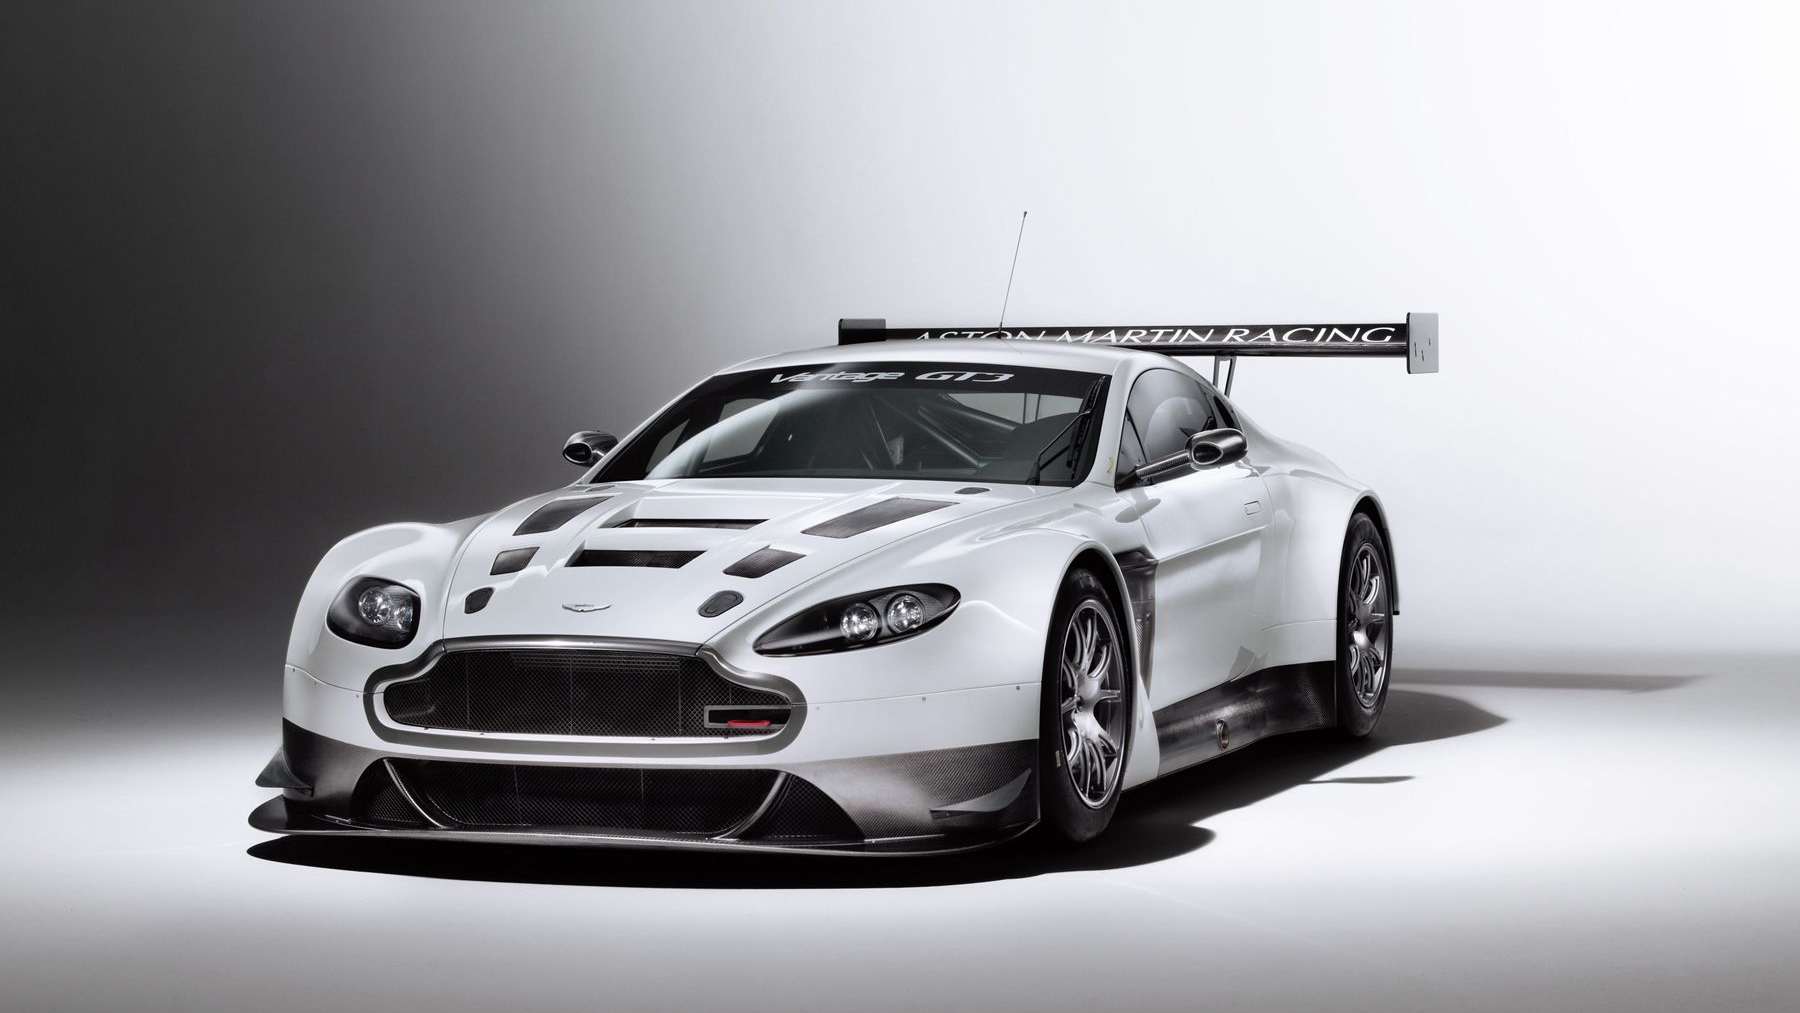 Front view of the new Aston Martin V12 Vantage GT3 racer - Aston Martin image